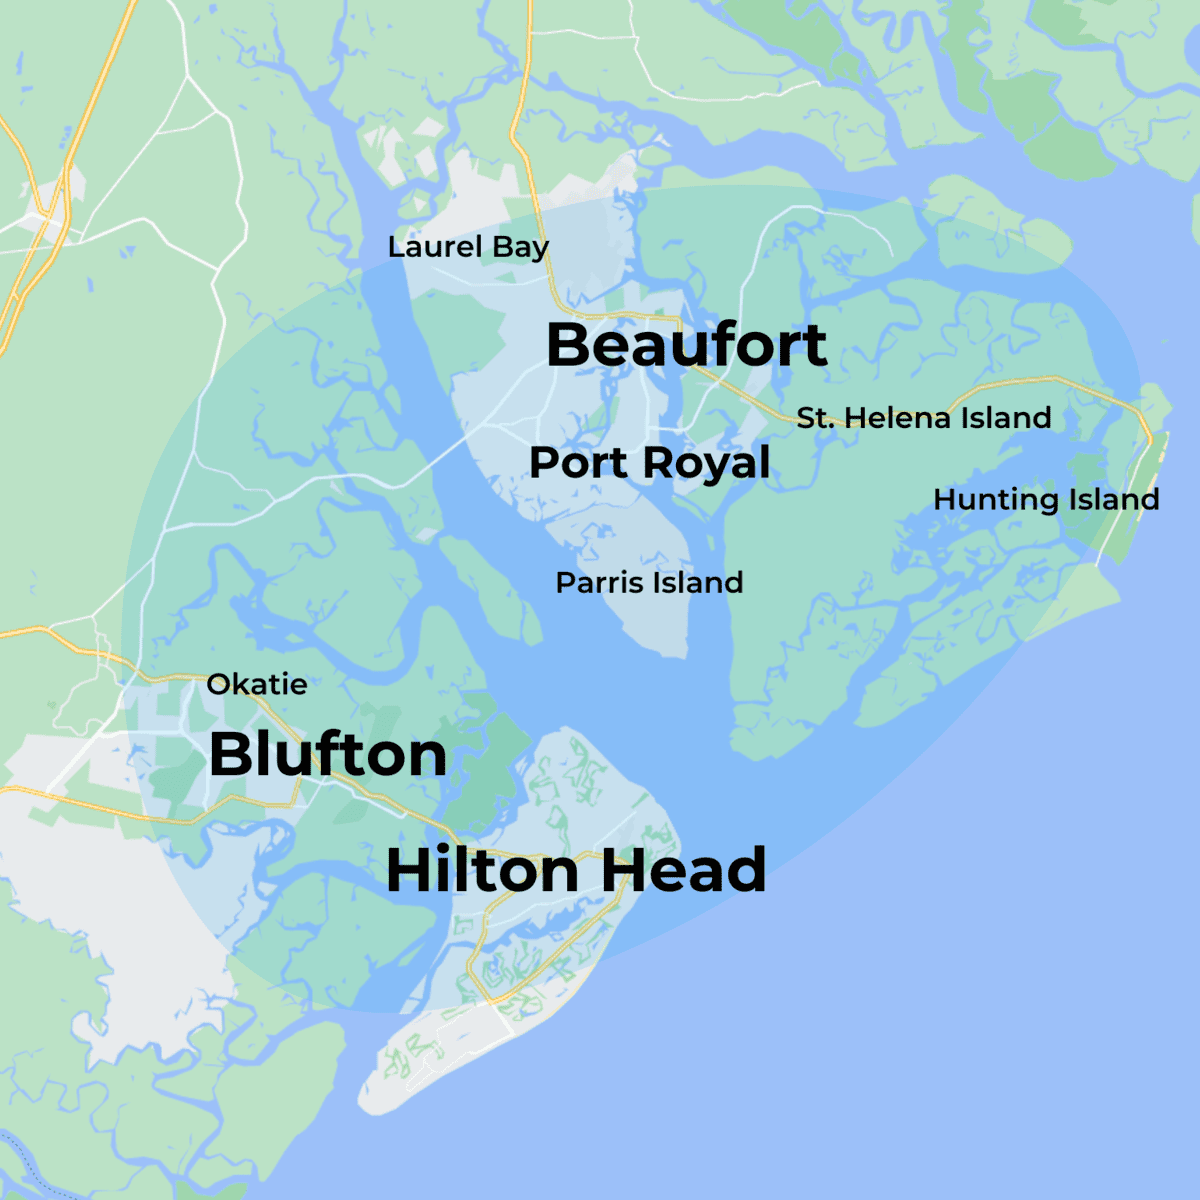 MovementX physical therapy in beaufort south carolina and blufton and hilton head location services coverage map